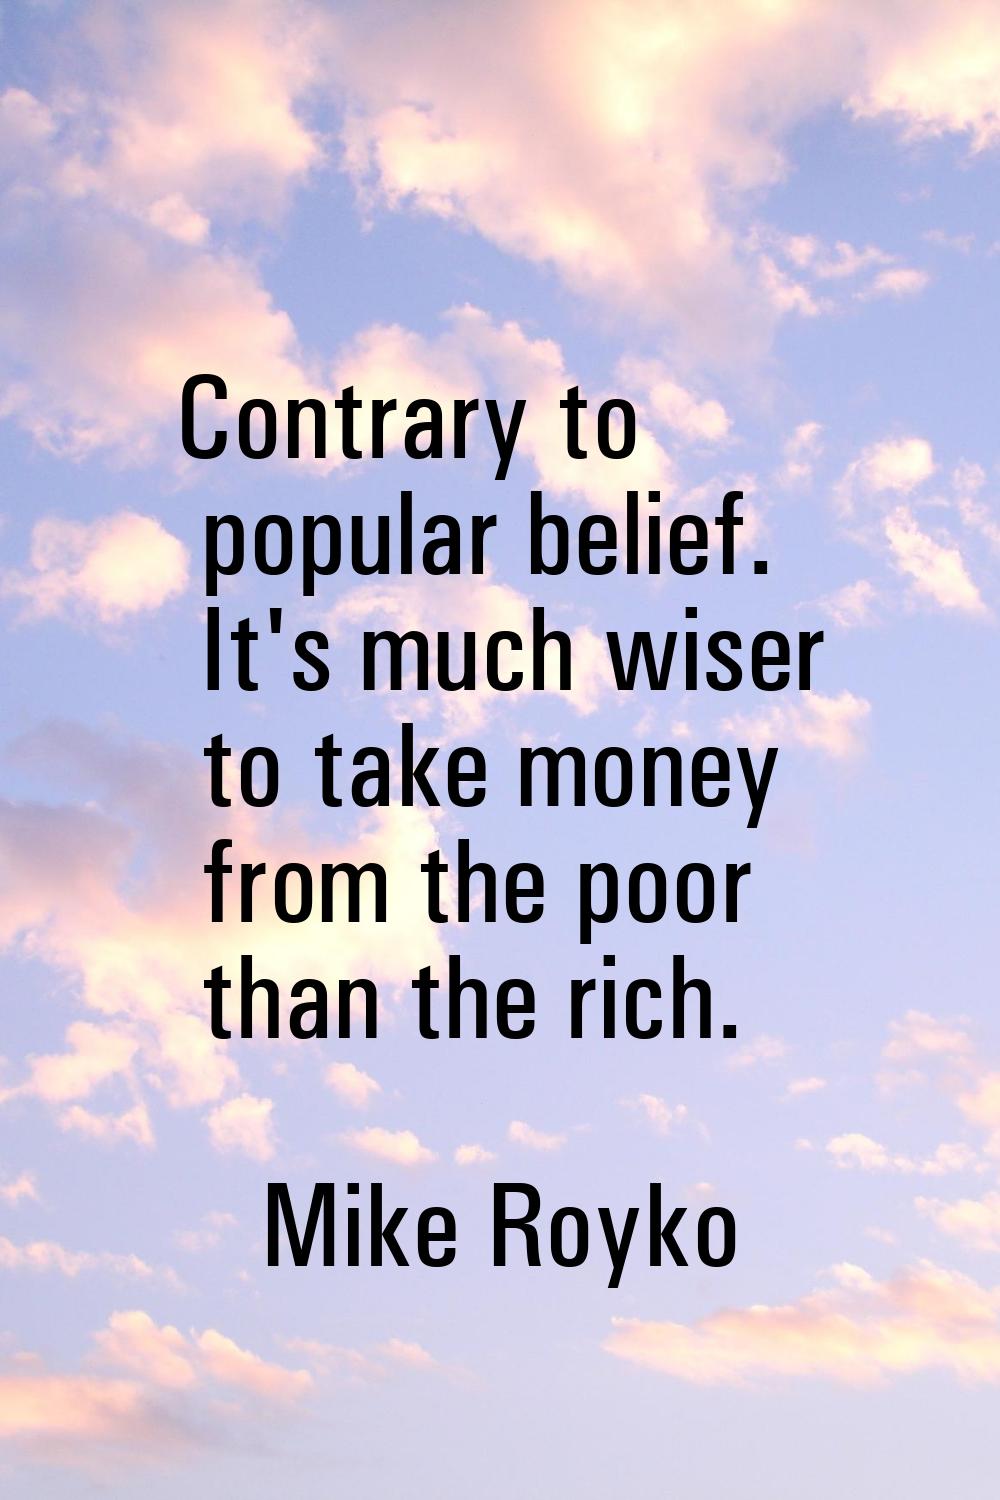 Contrary to popular belief. It's much wiser to take money from the poor than the rich.